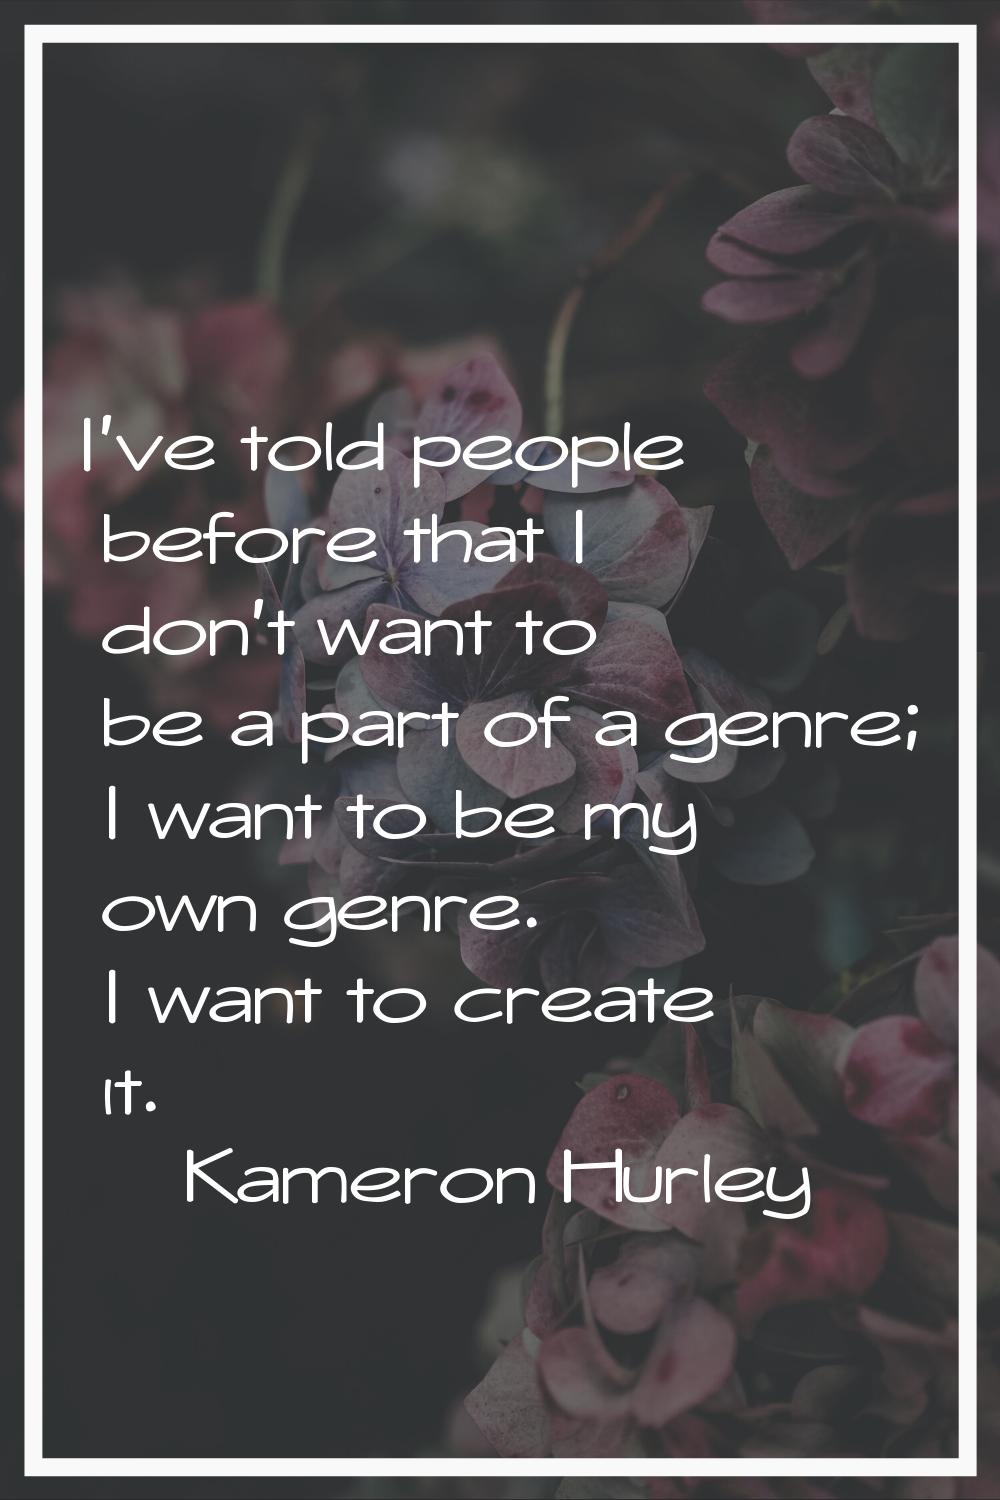 I've told people before that I don't want to be a part of a genre; I want to be my own genre. I wan